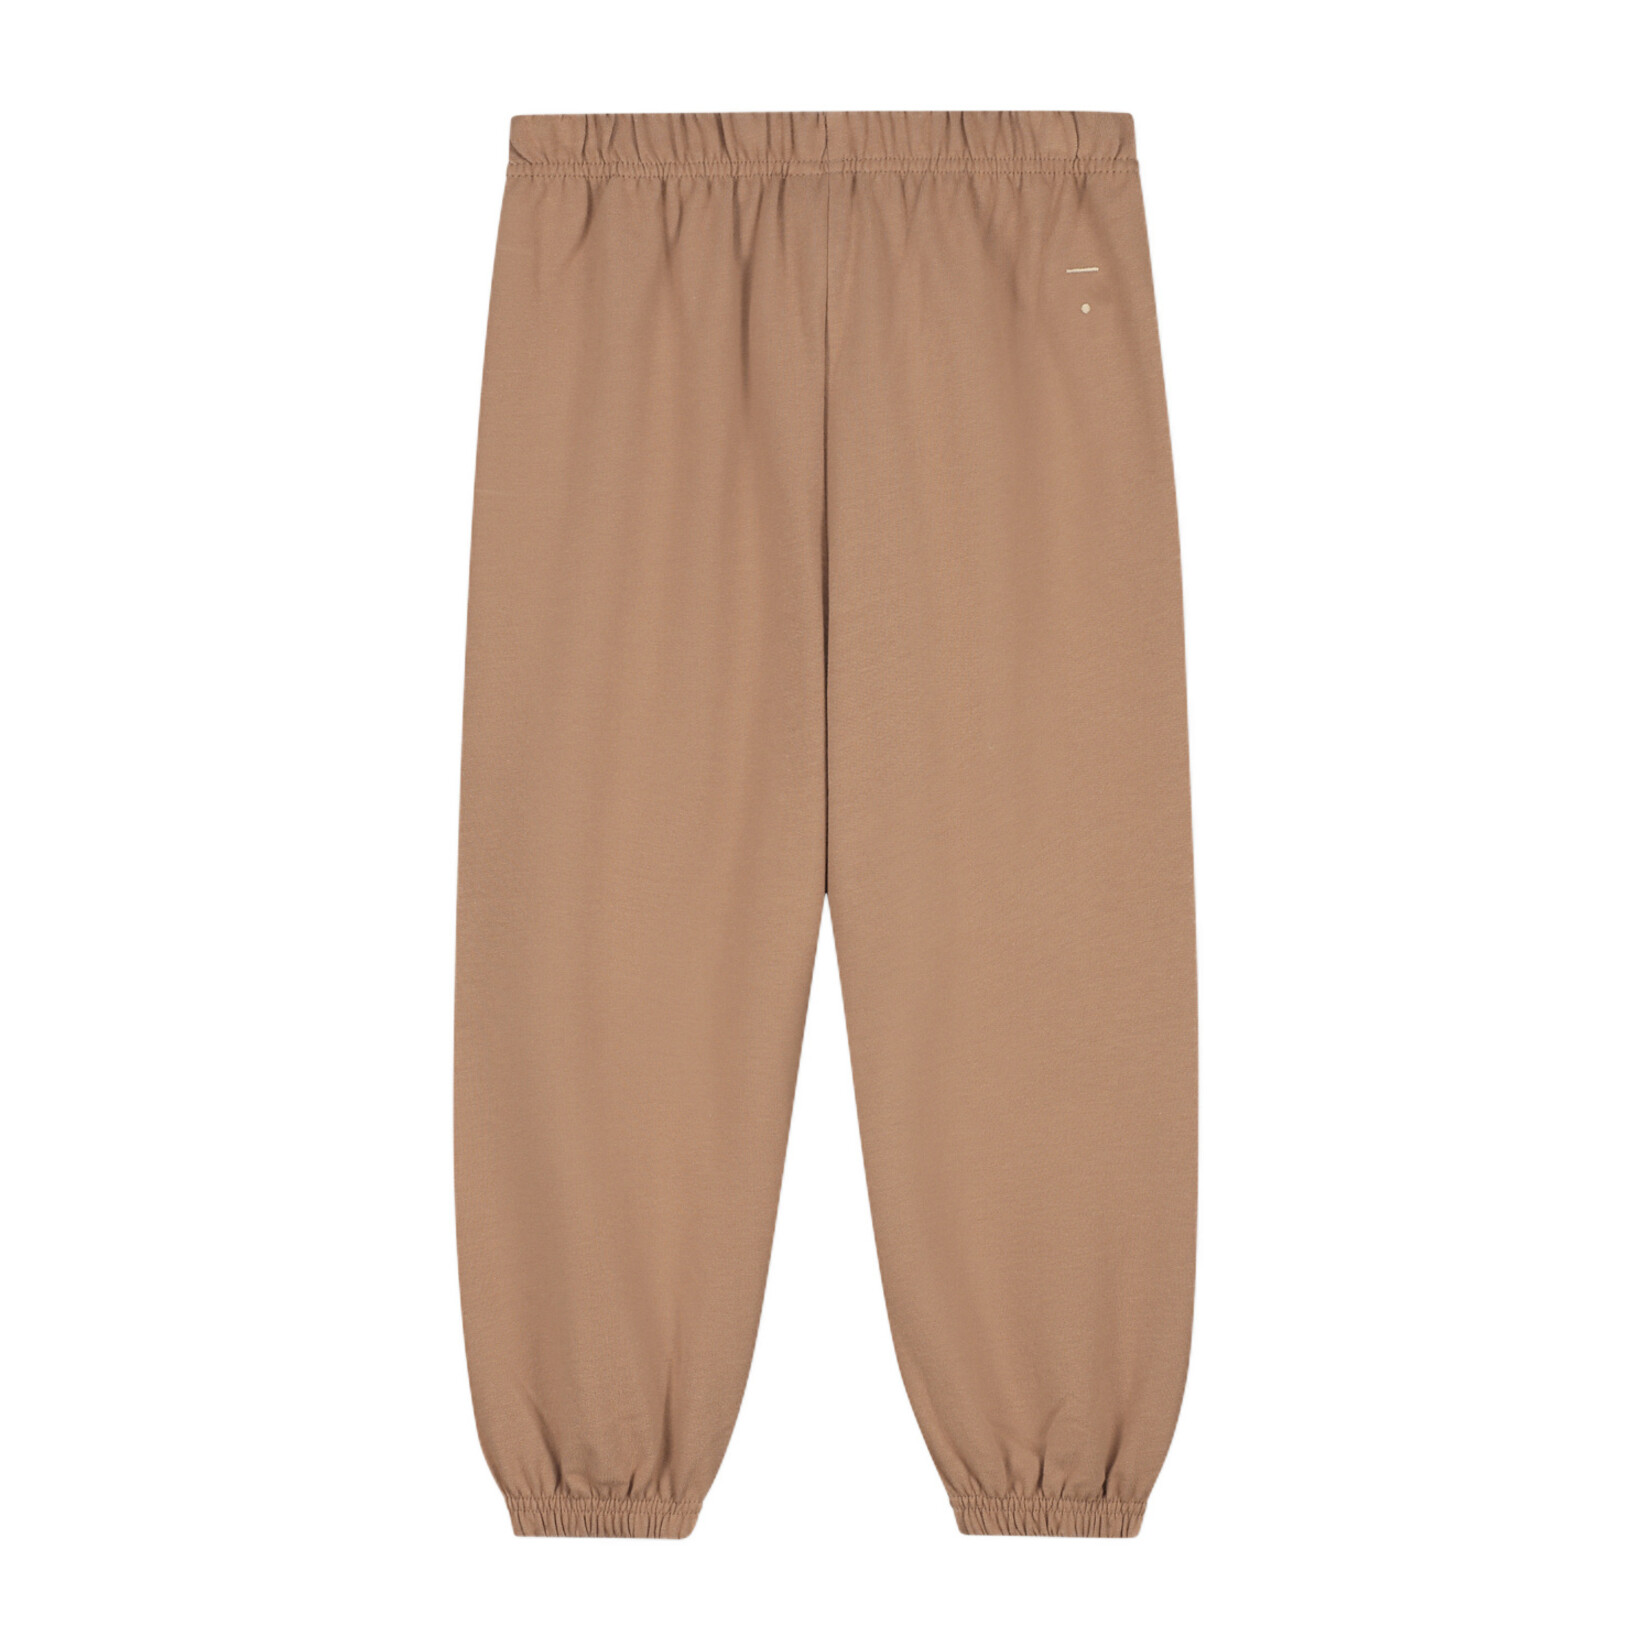 Gray Label Track Pants GOTS - Biscuit